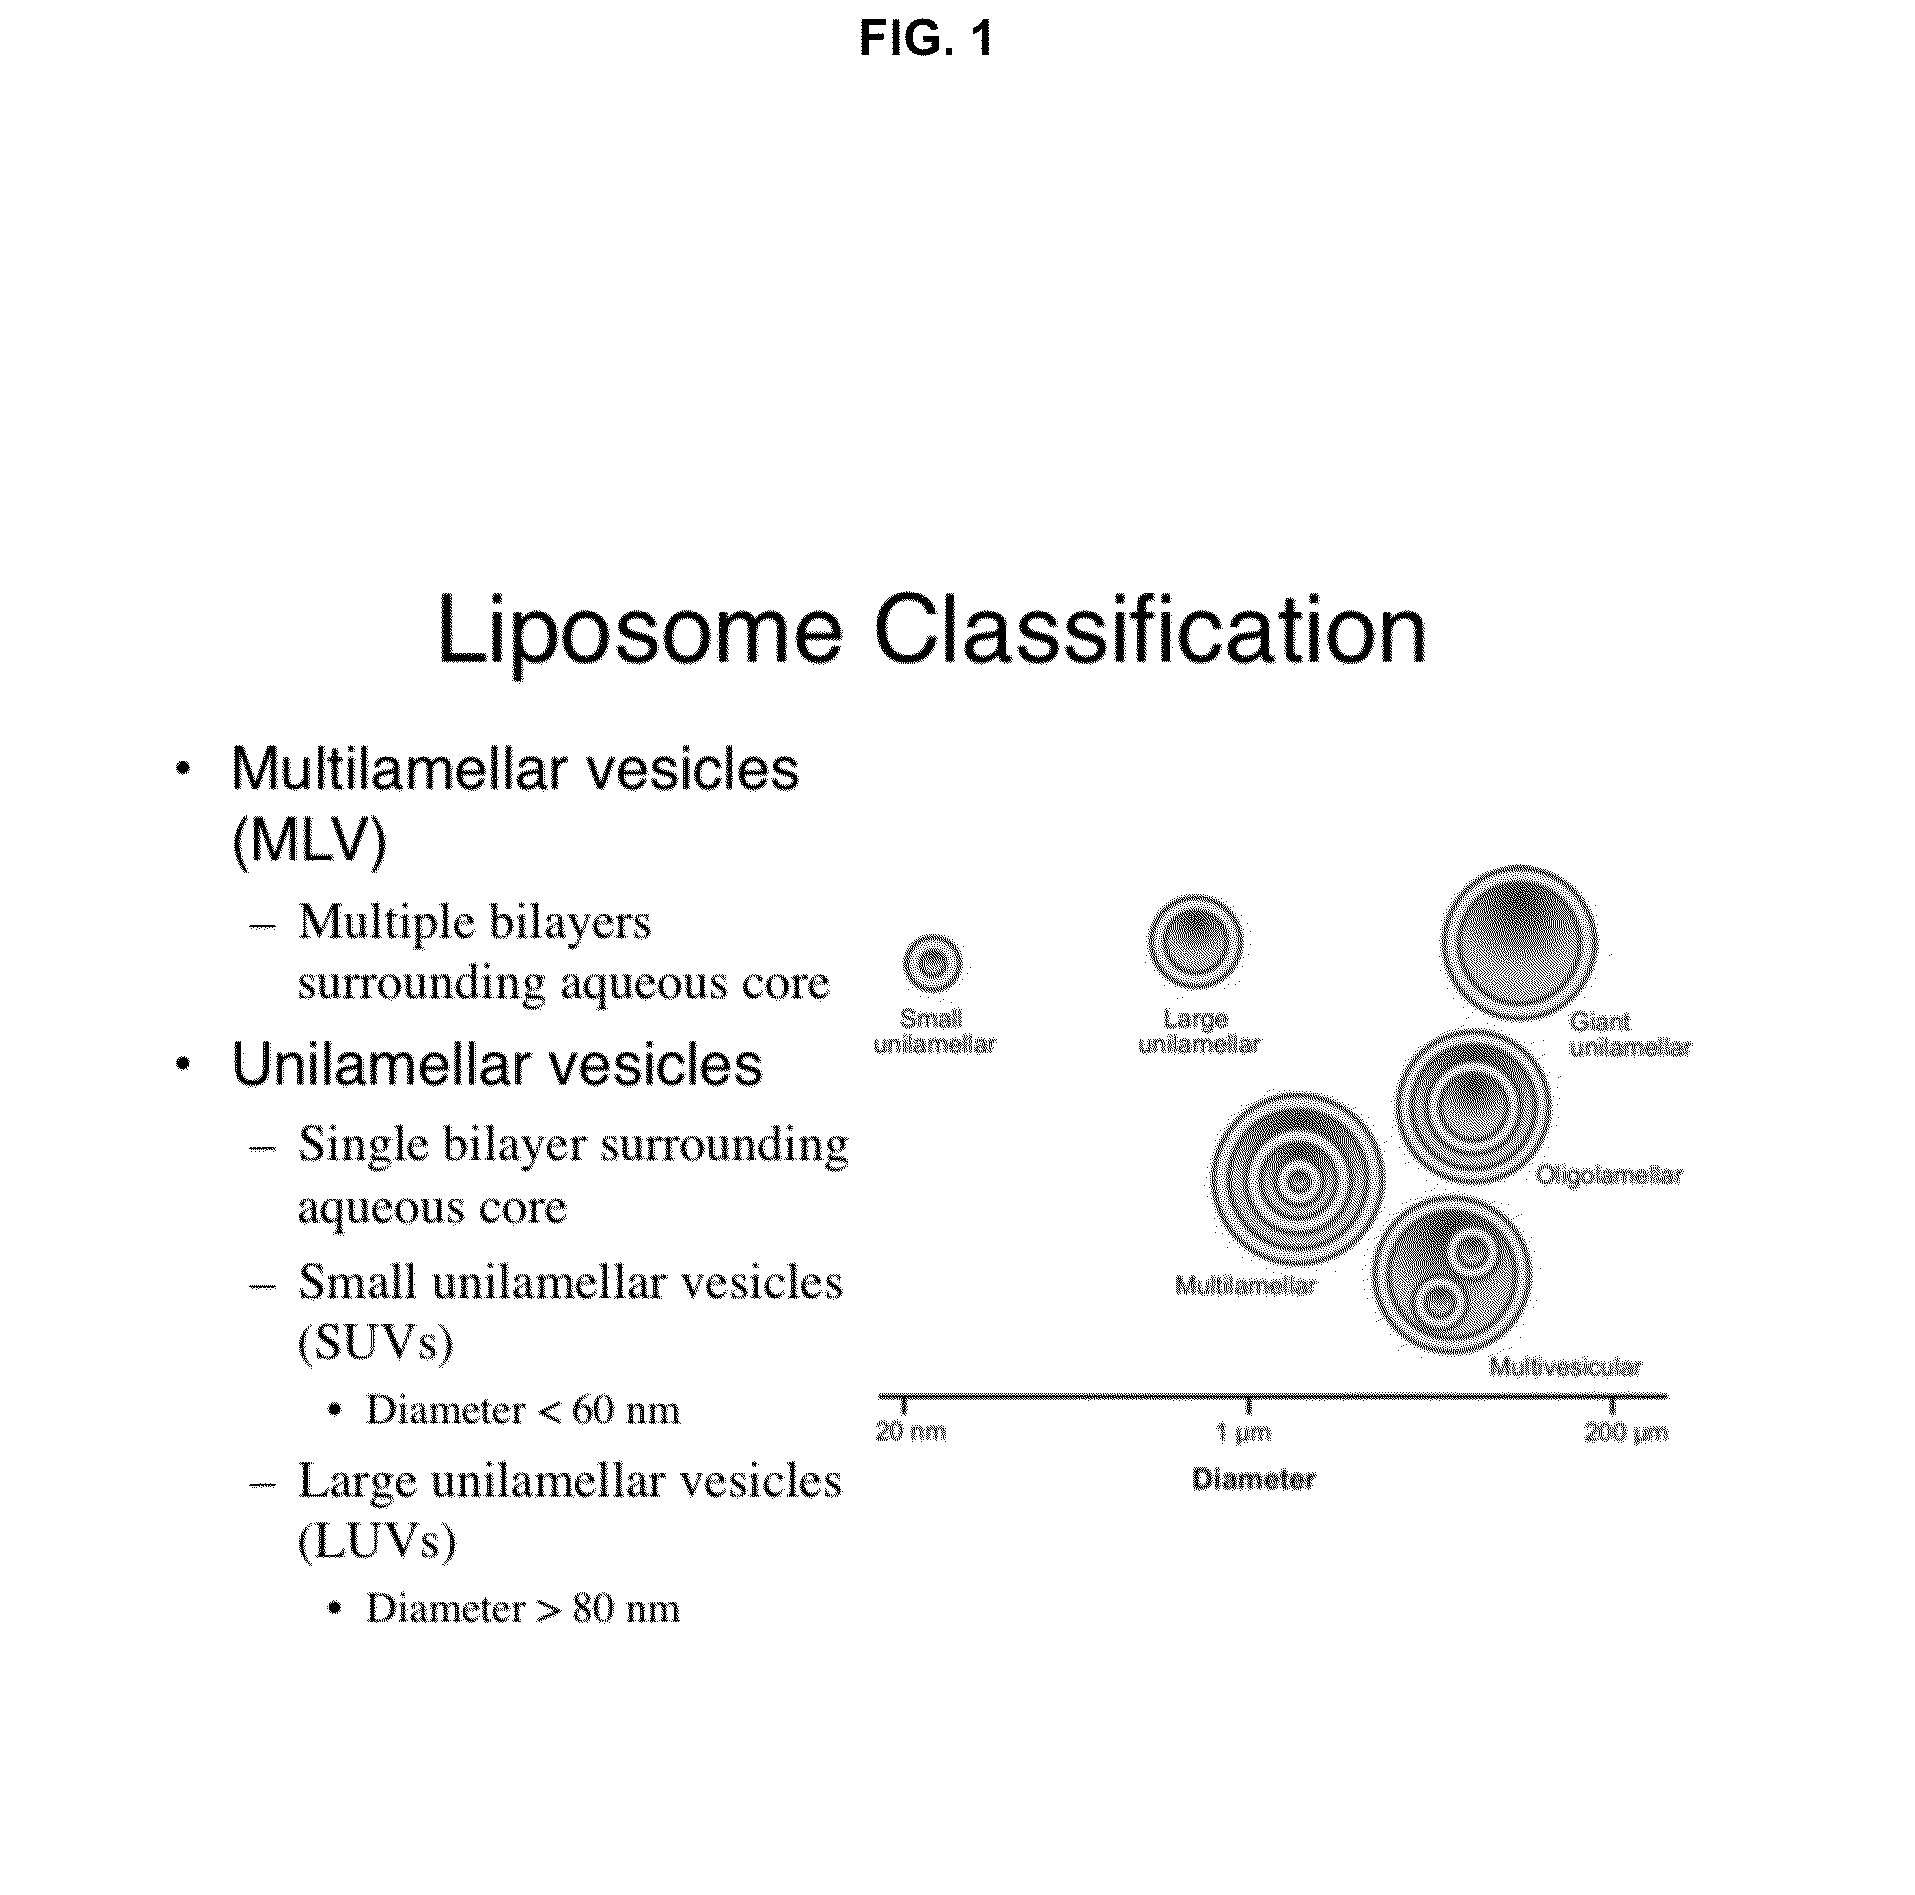 Remote loading of sparingly water-soluble drugs into liposomes